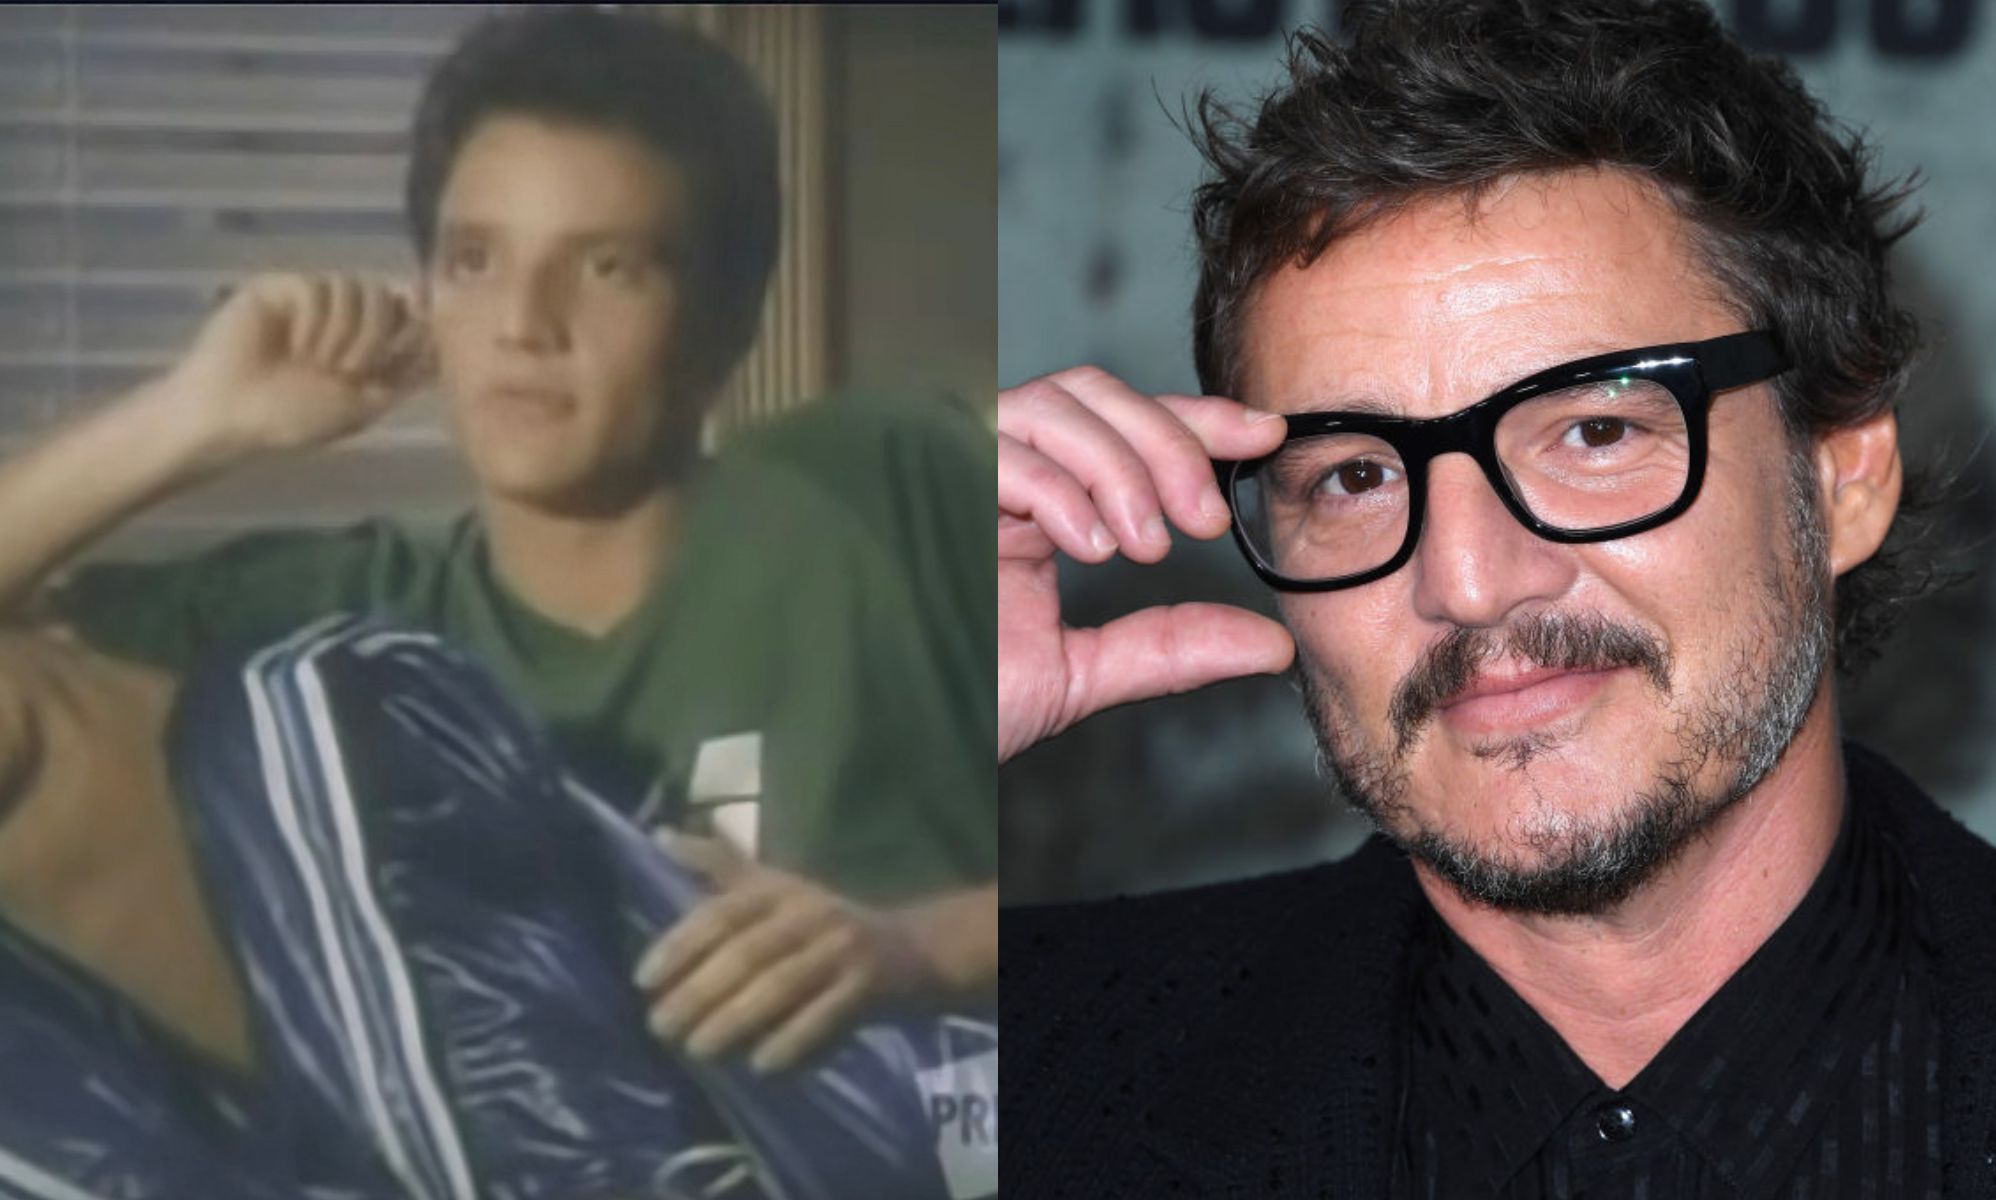 90s Gay Porn Facial - Pedro Pascal's gay character in 90s MTV series sends internet wild